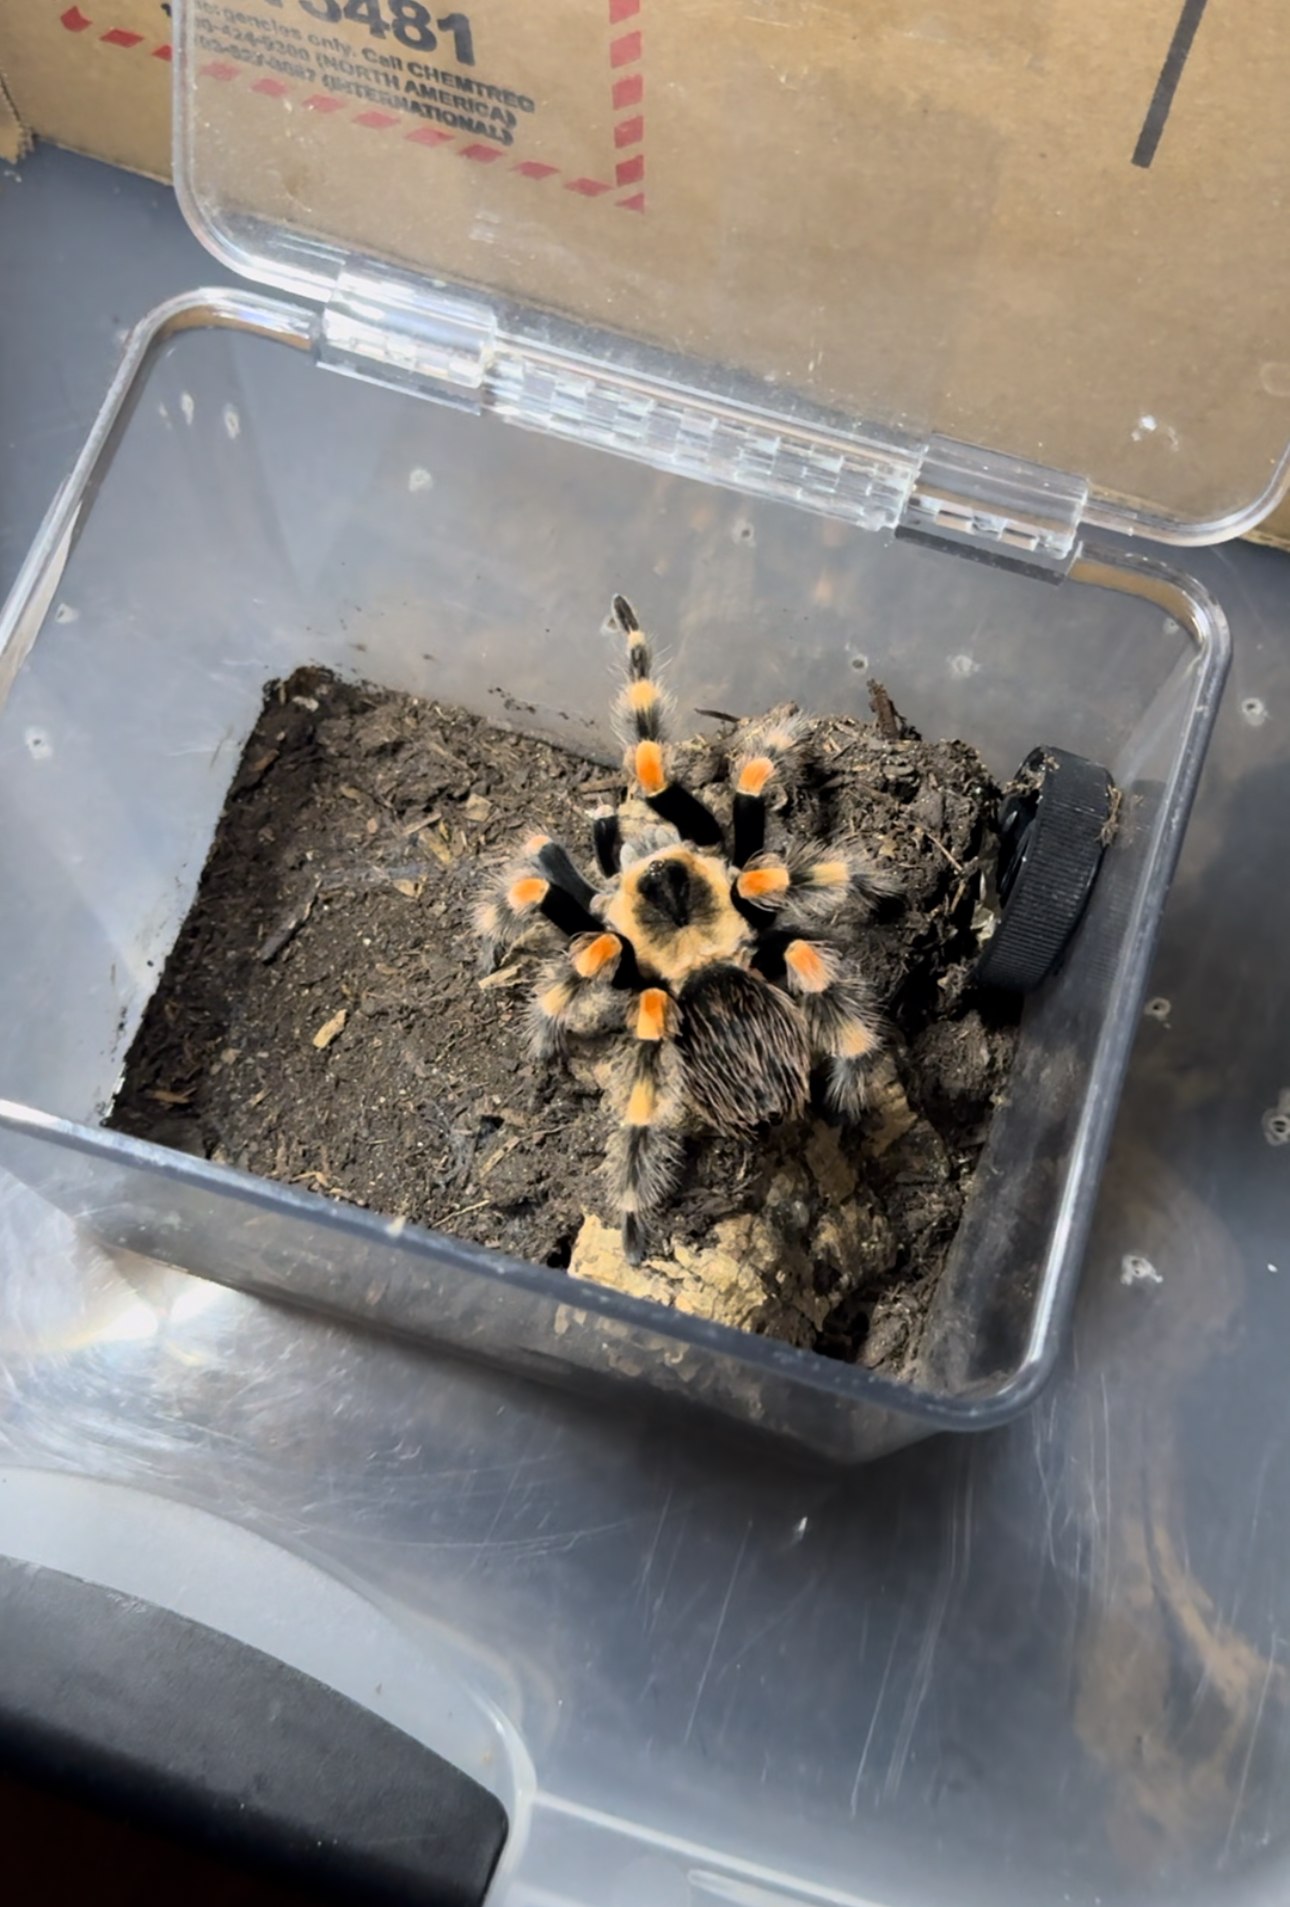 What Brachypelma species am I looking at?